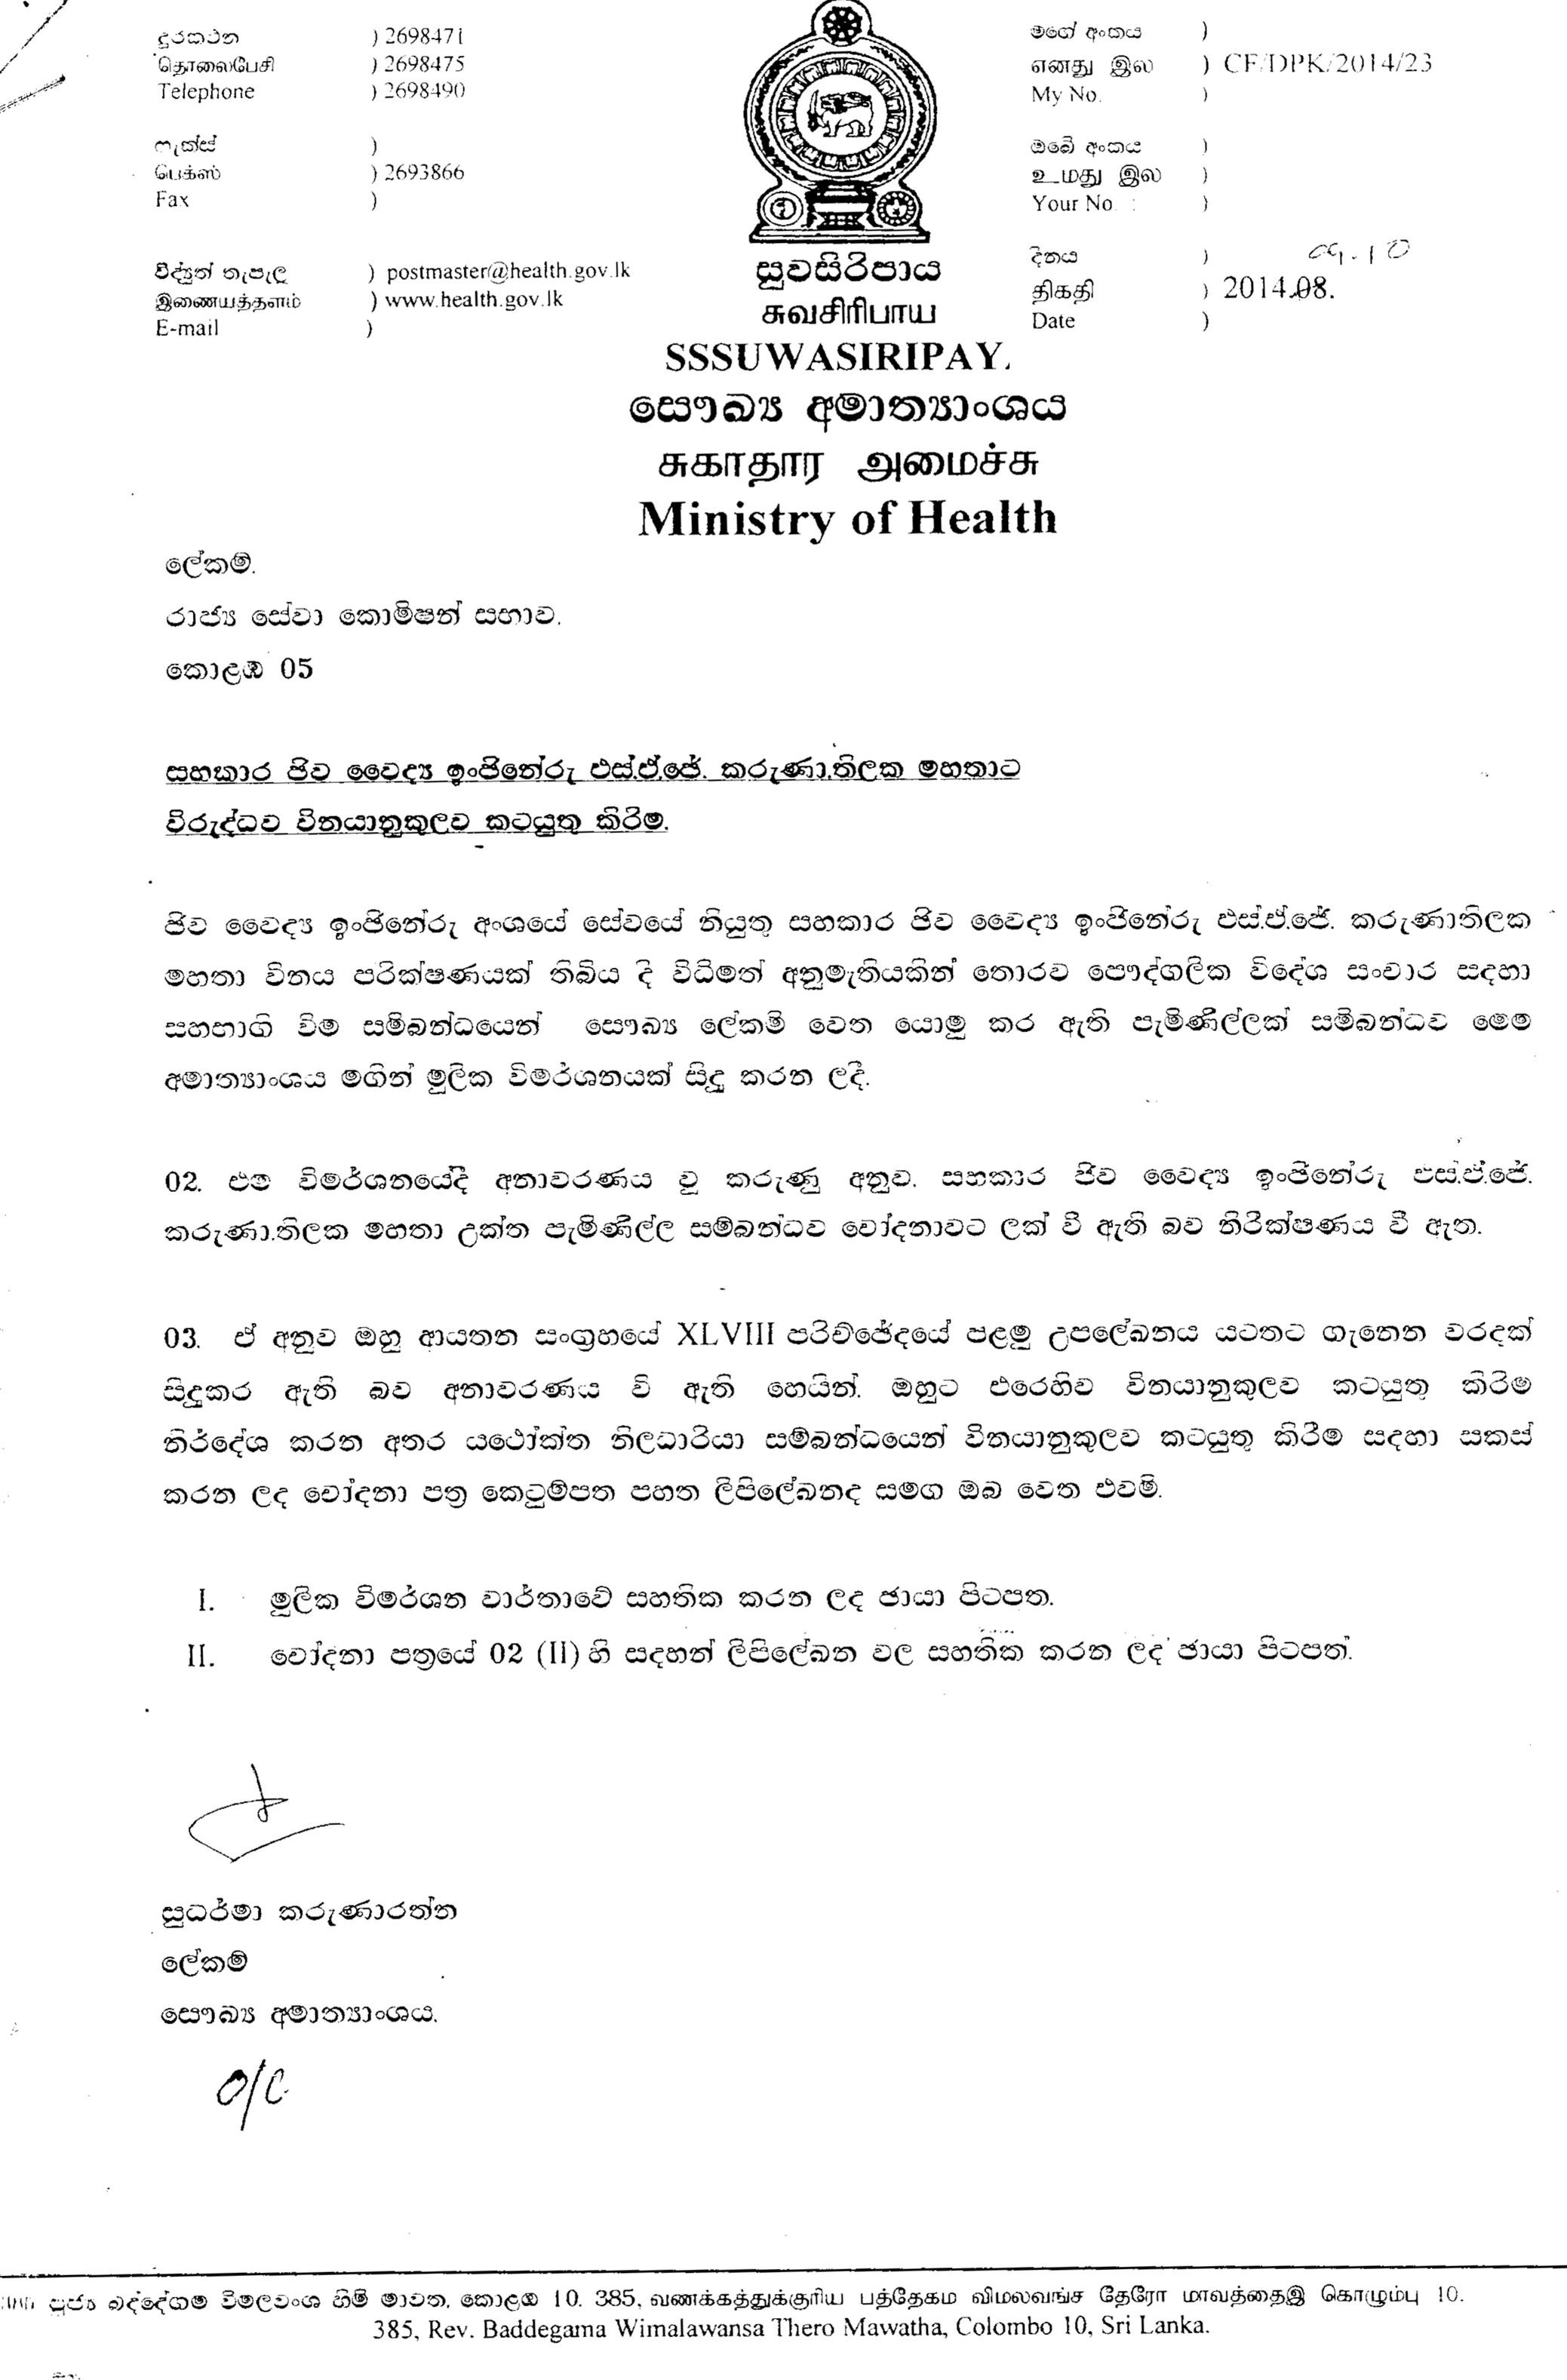 The technical specialist to sign off on the project was S.A.J. Karunatilaka, an engineer attached to the Health Ministry&#x002019s Division of Biomedical Engineering Services based on de Saram Road, Colombo 10. Information now in the hands of Colombo Telegraph (see image 2) show that this individual had been caught red-handed, making as many as 15 secret, unauthorised overseas trips over the past several years.